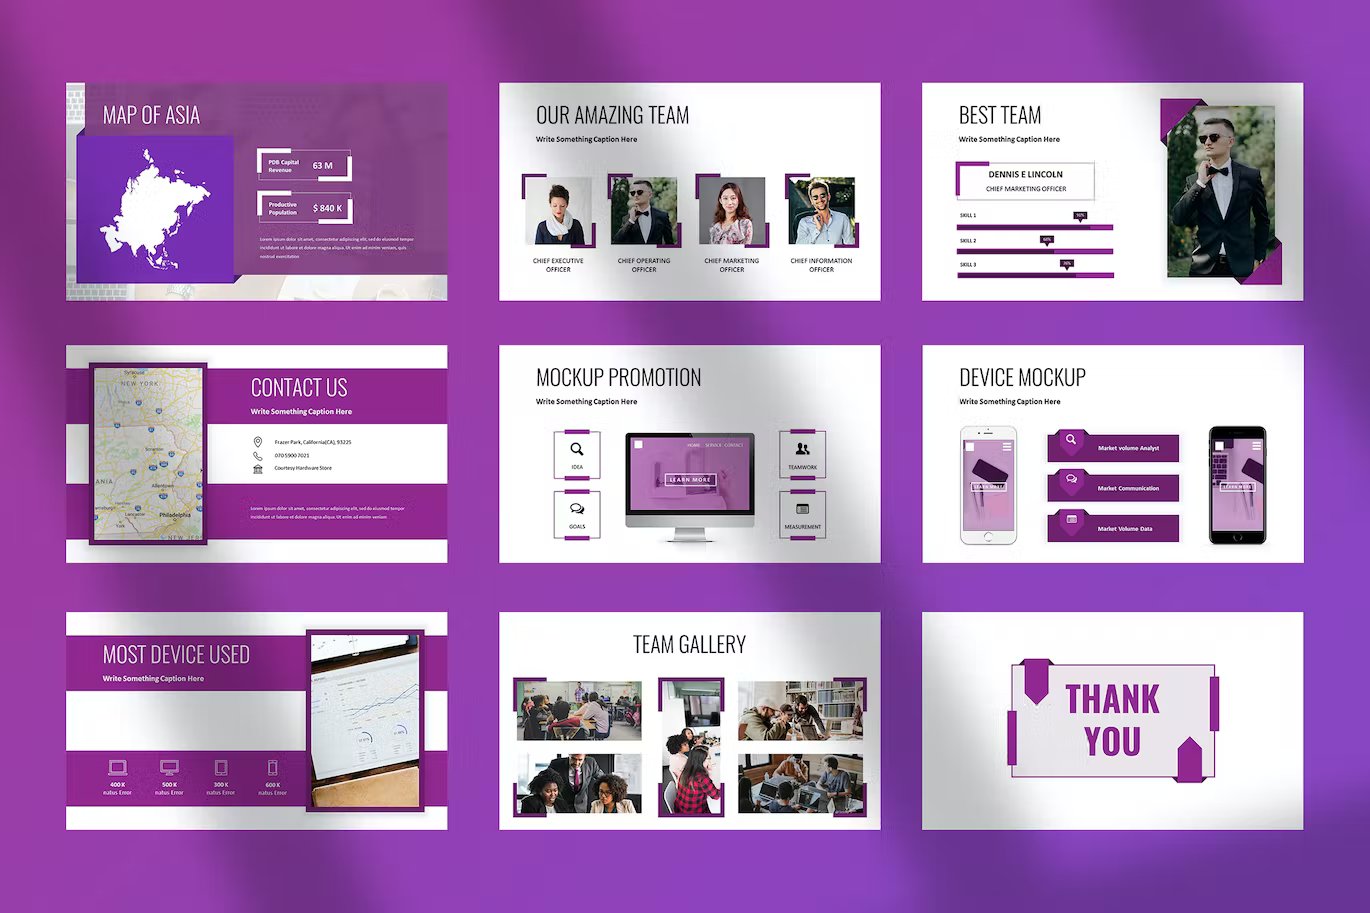 A set of 9 different executive - powerpoint presentation for business templates in white, purple and black on a purple background.